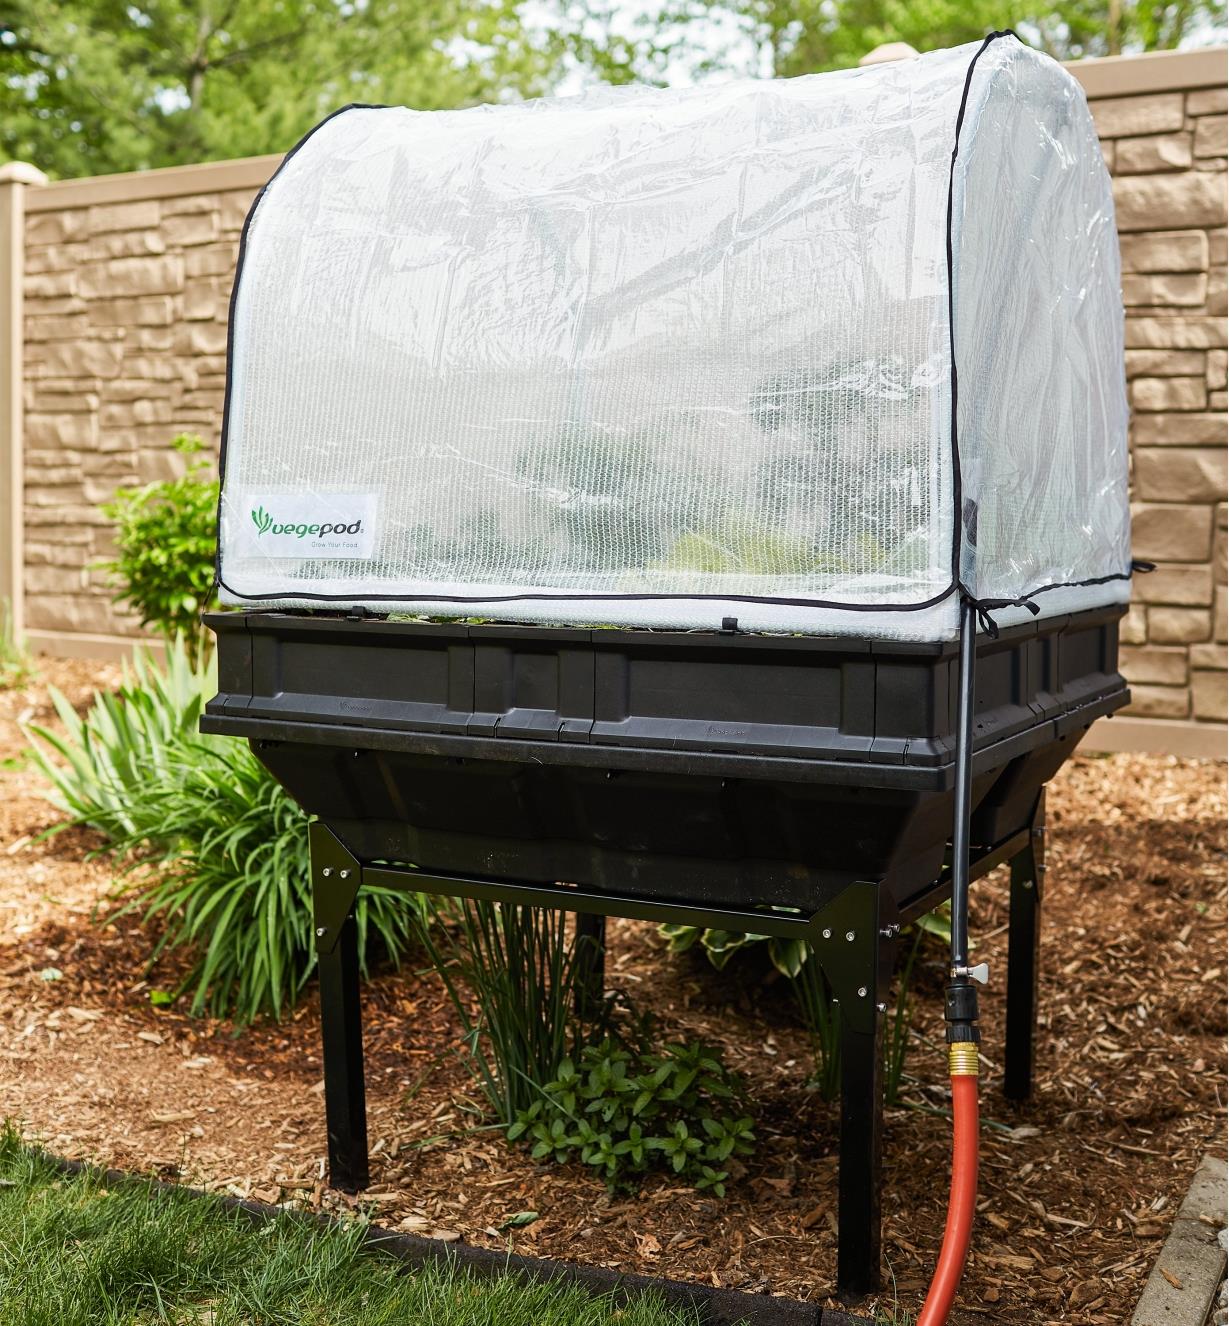 A Vegepod container garden with a base and the cover closed sits in a garden